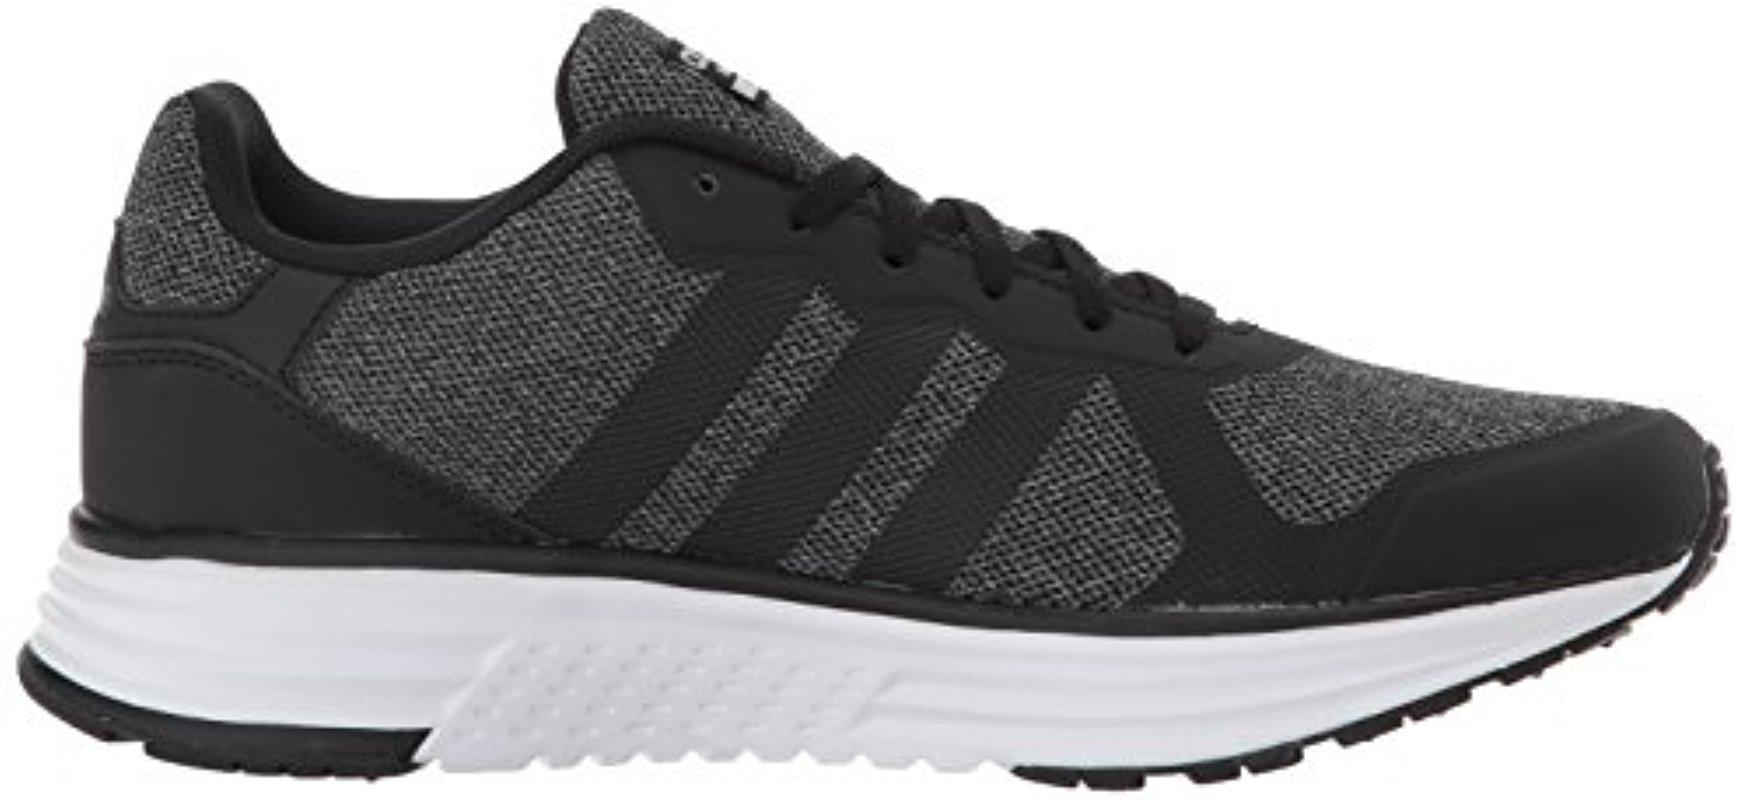 adidas Synthetic Neo Cloudfoam Flyer W Running Shoe in Black/White (Black)  | Lyst